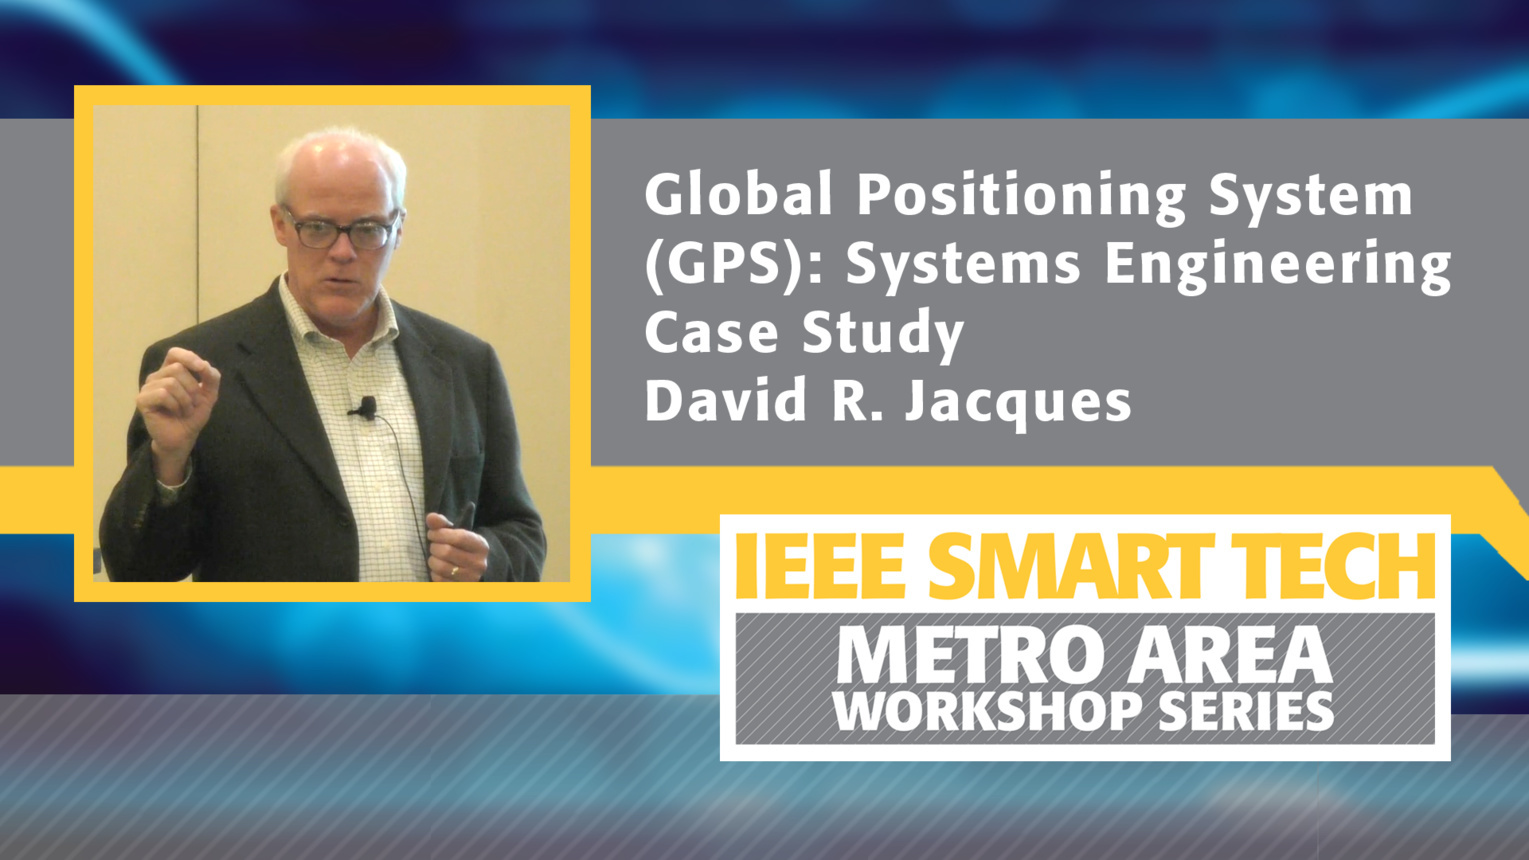 Global Positioning System (GPS): Systems Engineering Case Study